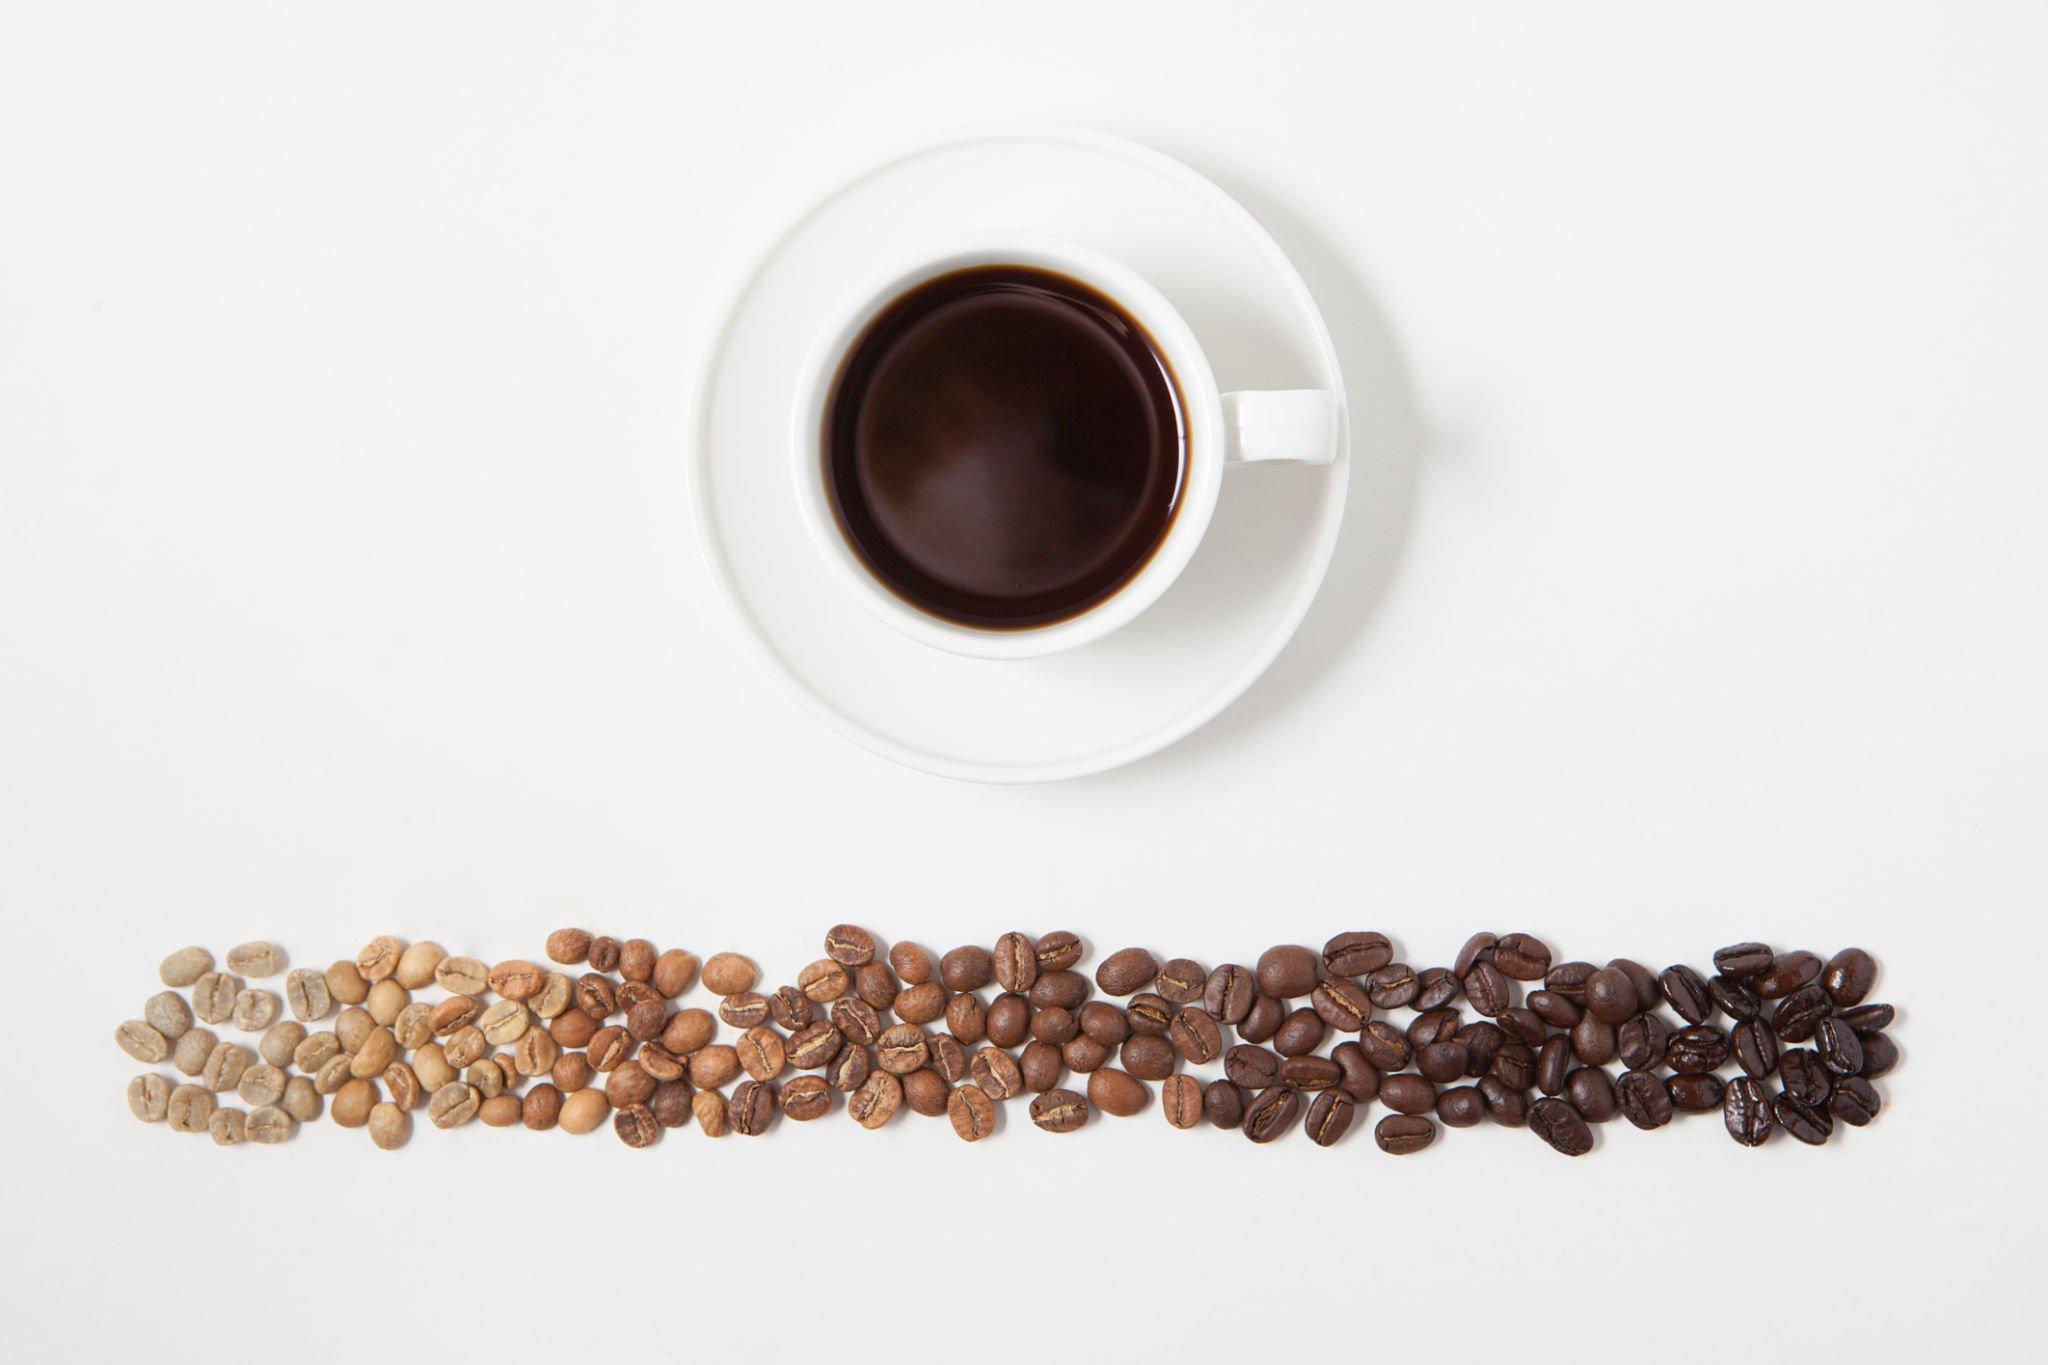 Choose the Best Roast for Your Morning Coffee